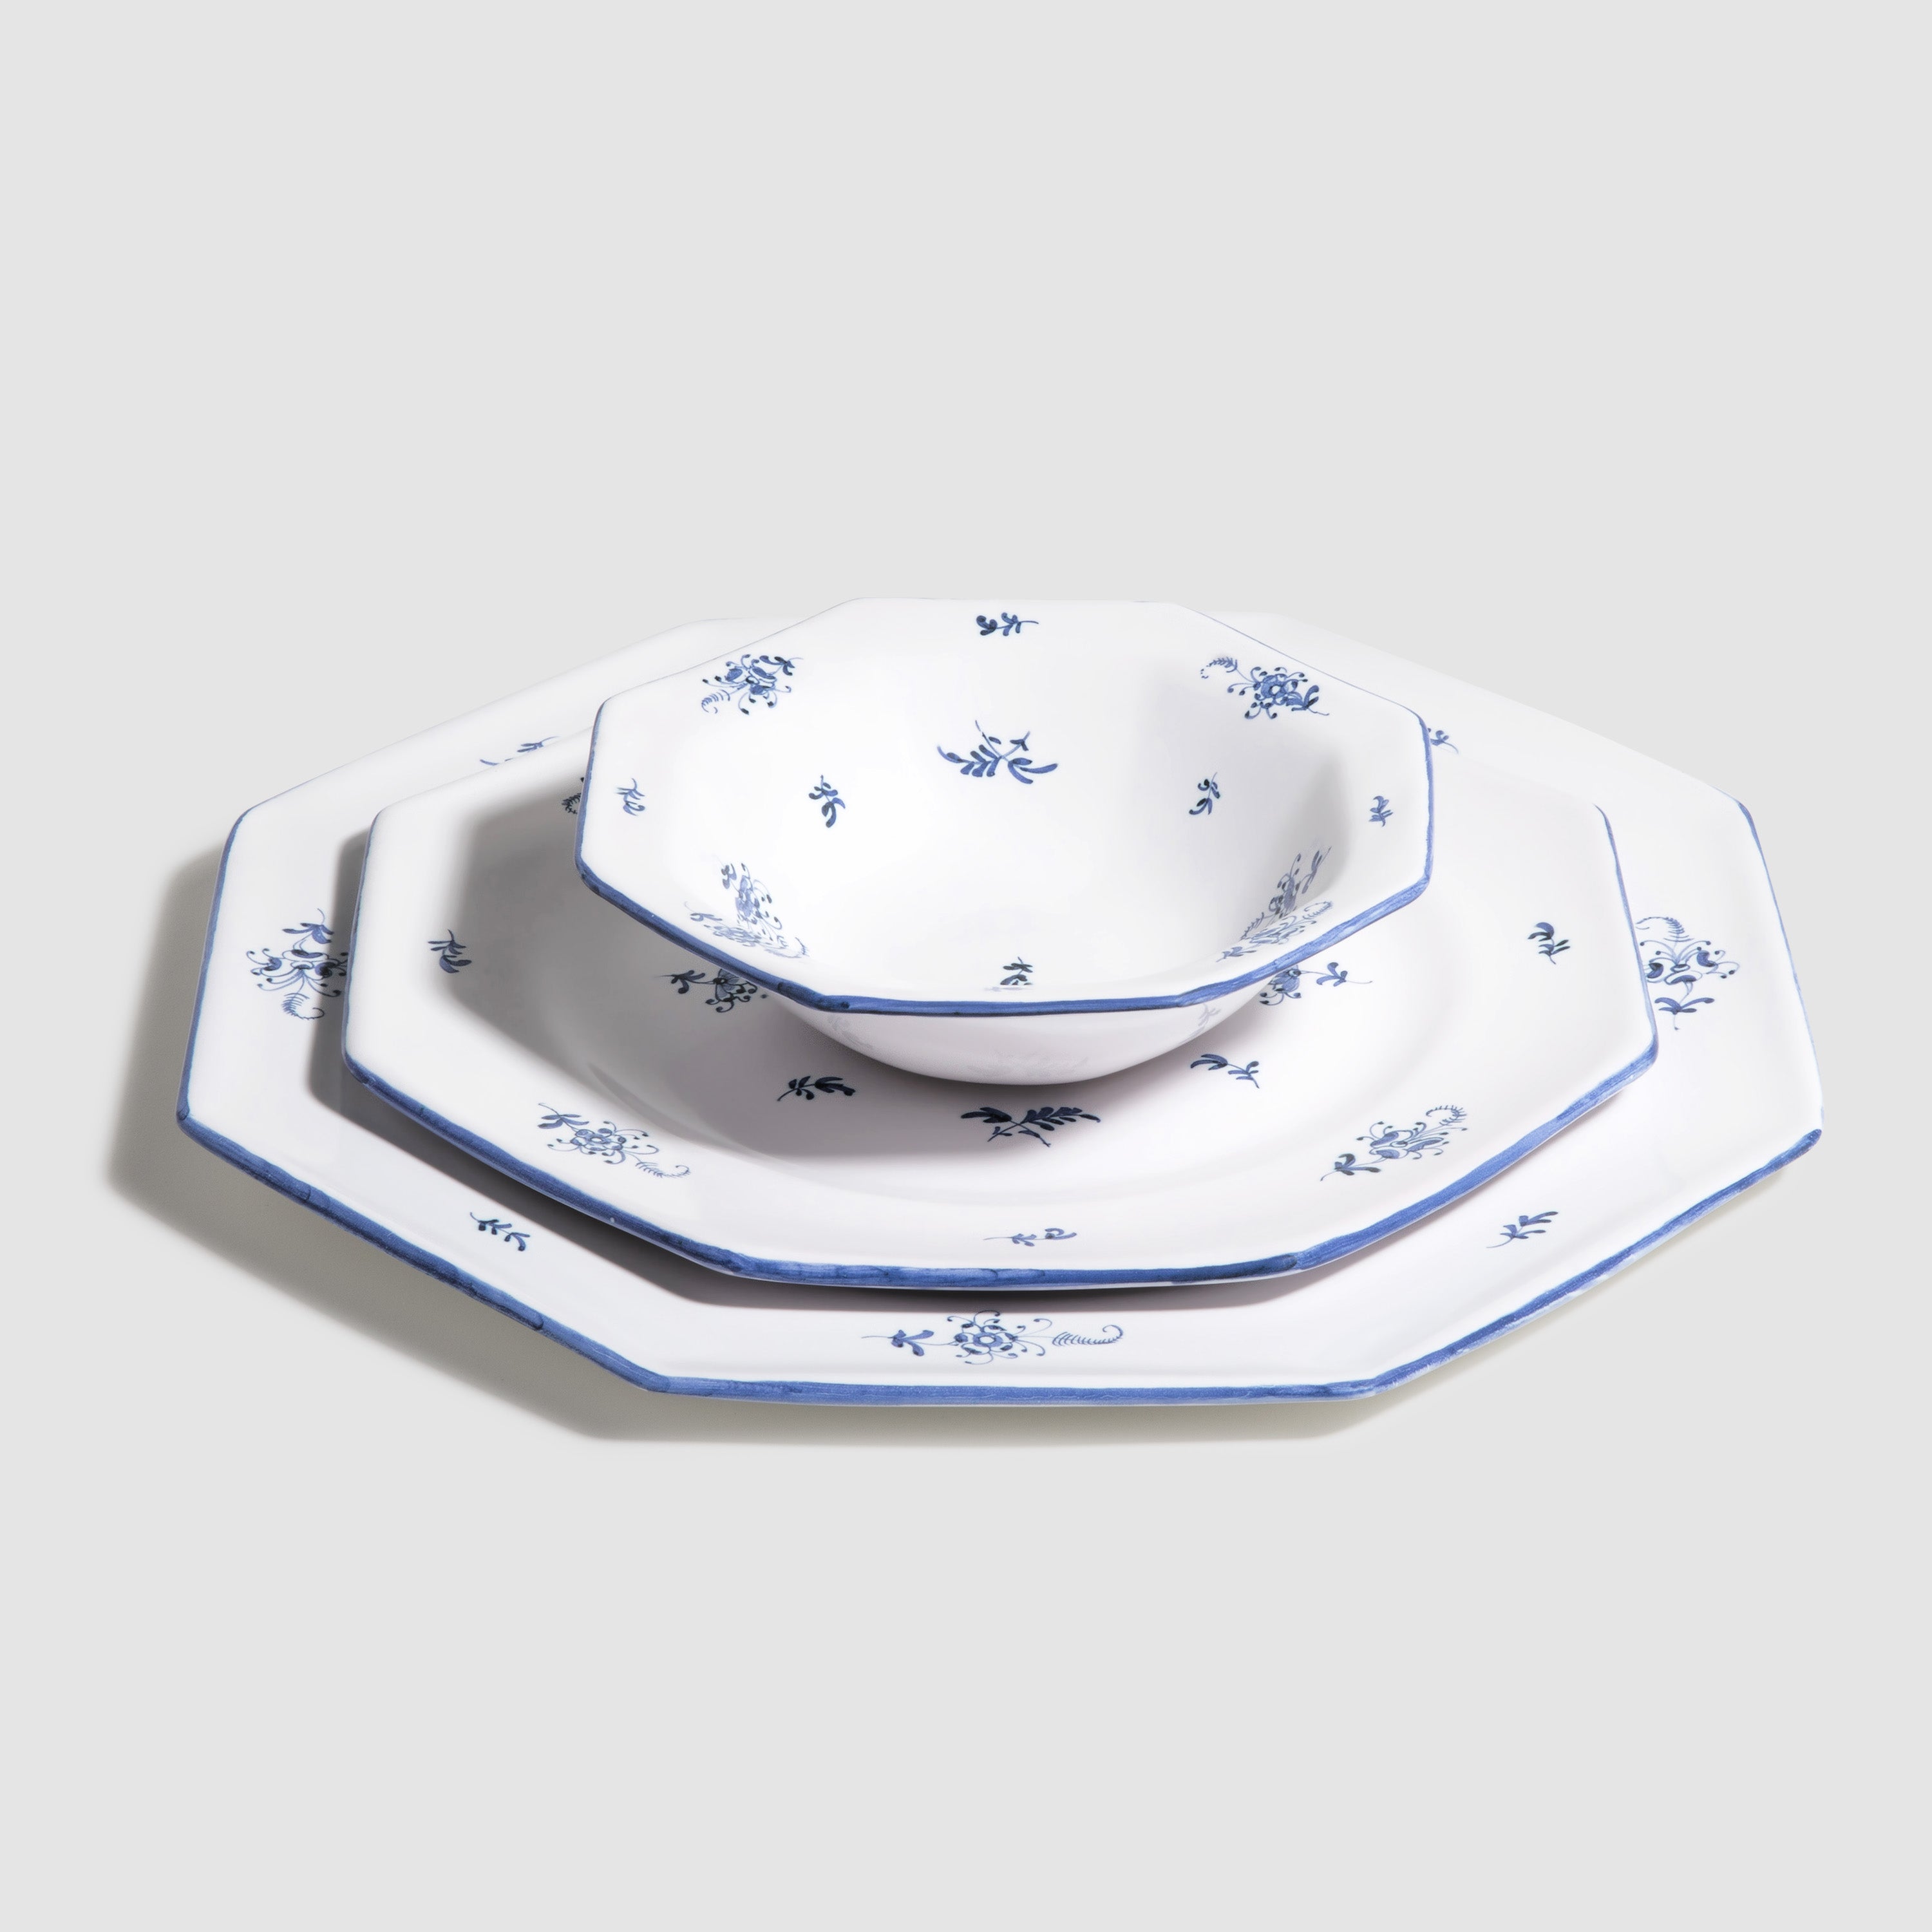 Brindille Salad/Starter Plate with Dinner Plate and Bowl, Blue Moustiers